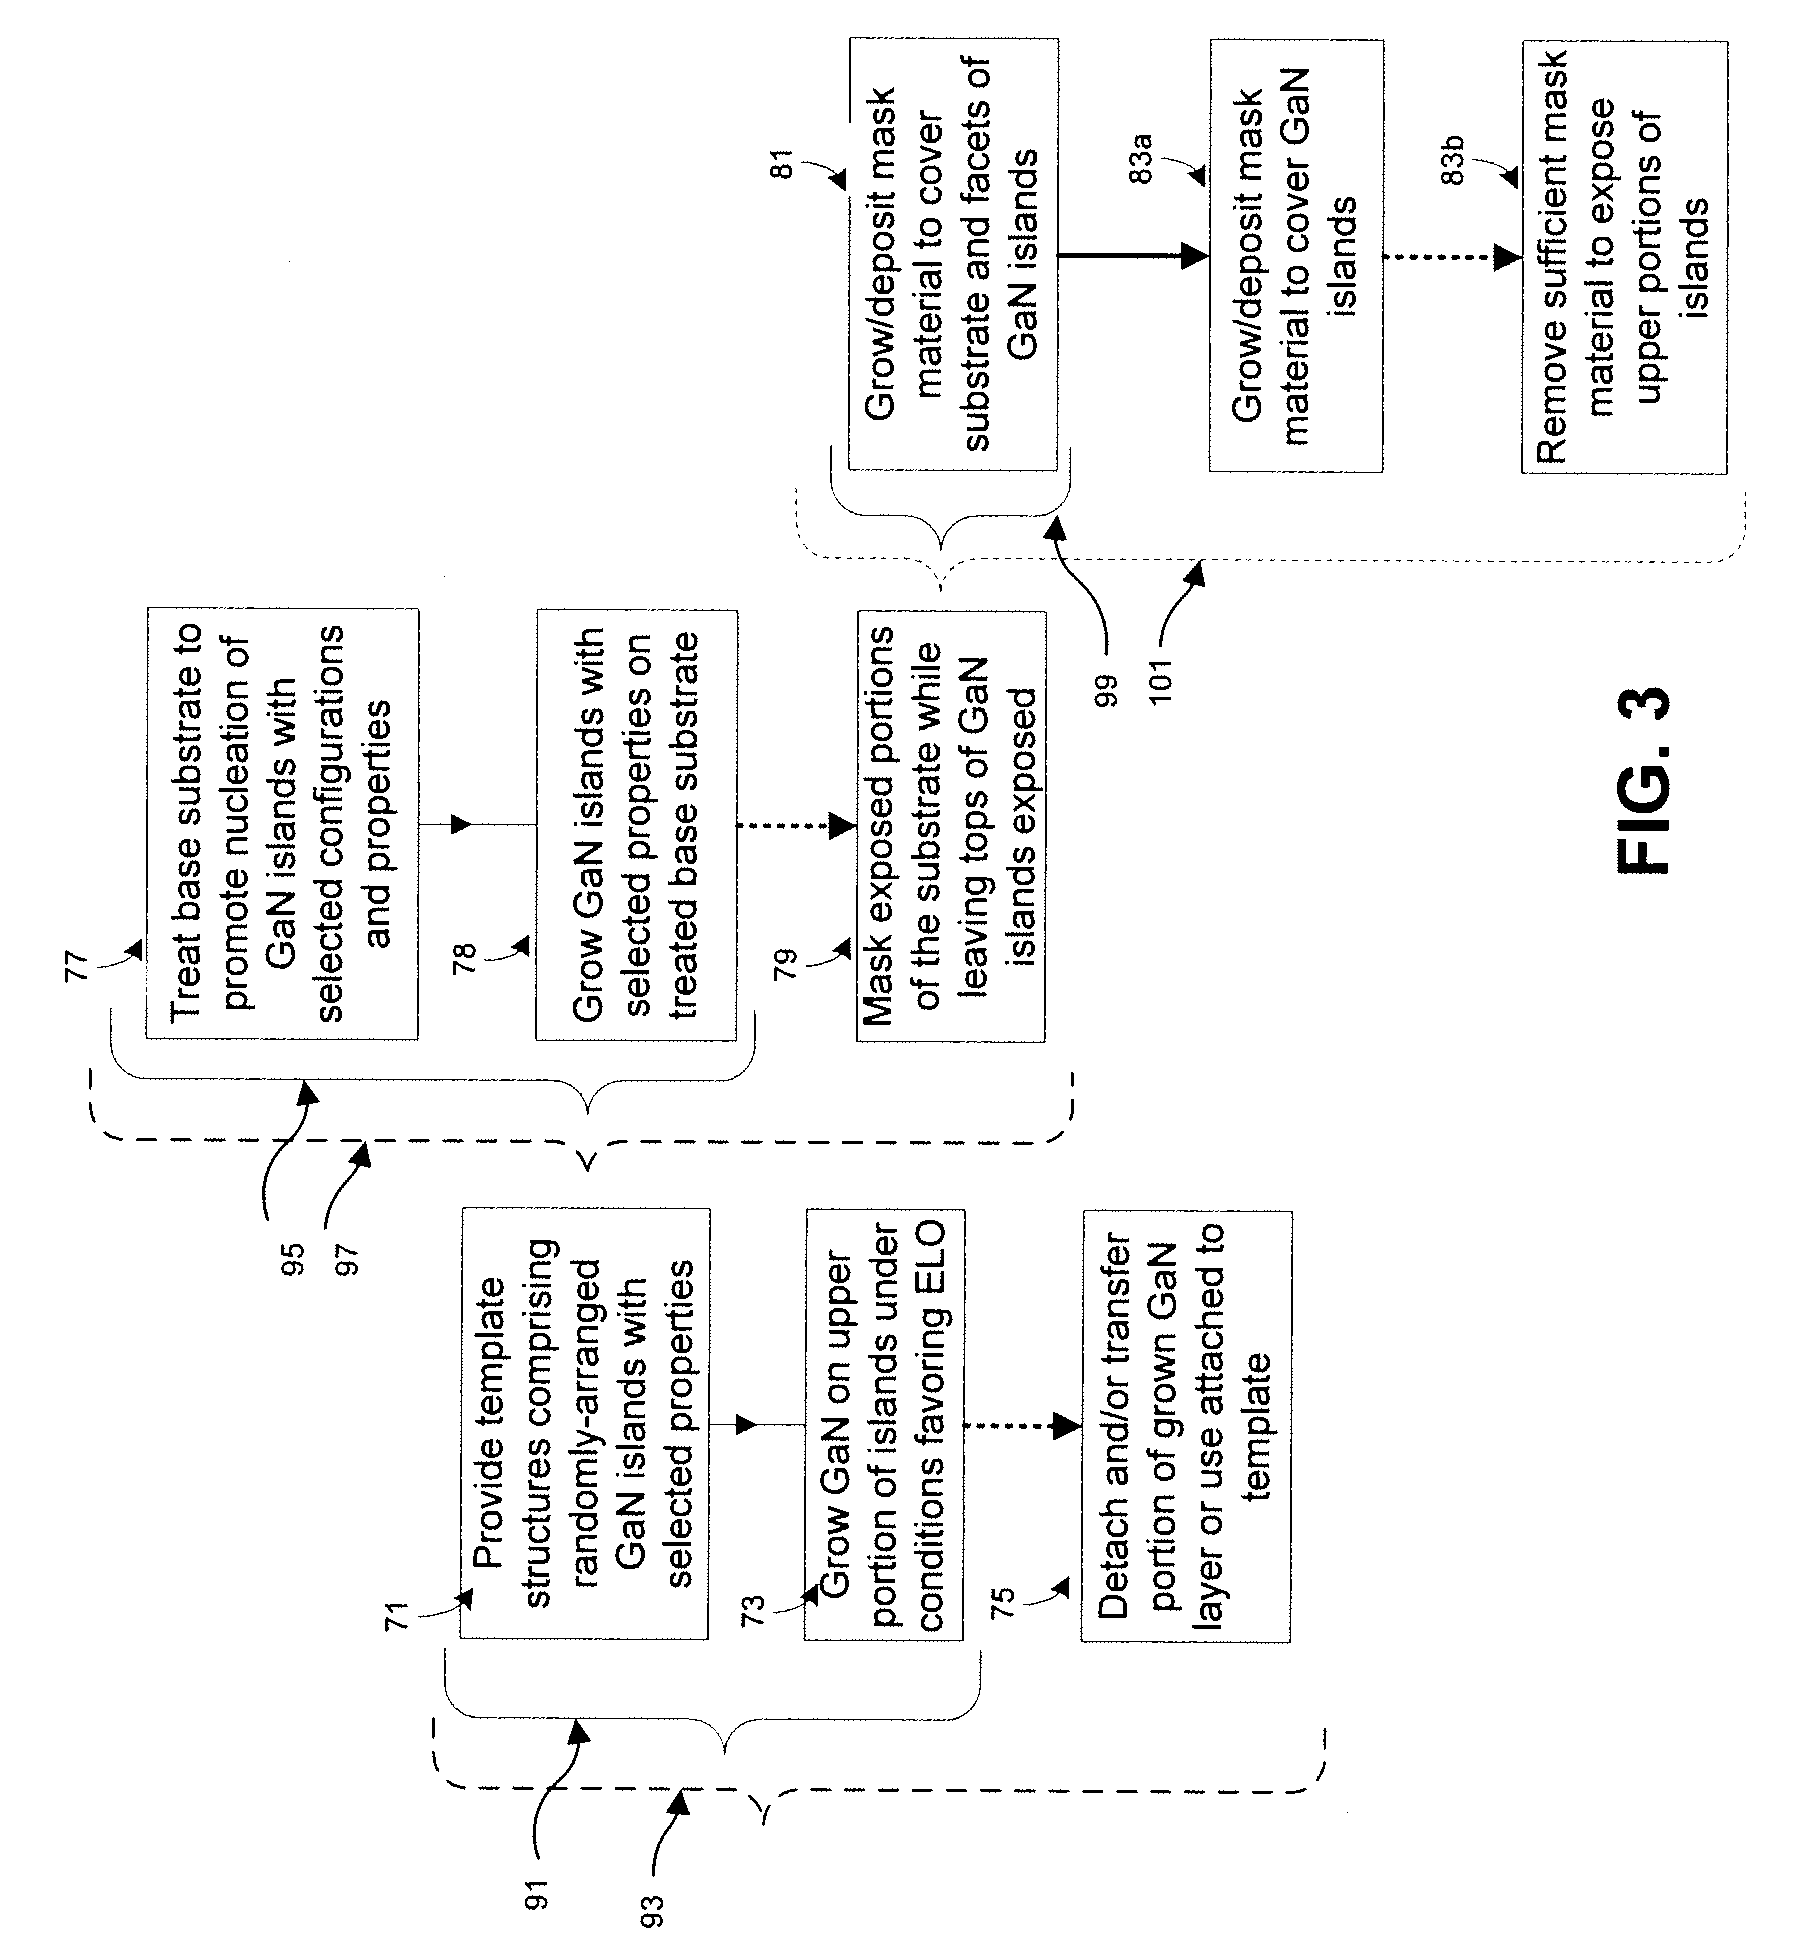 Epitaxial methods and templates grown by the methods